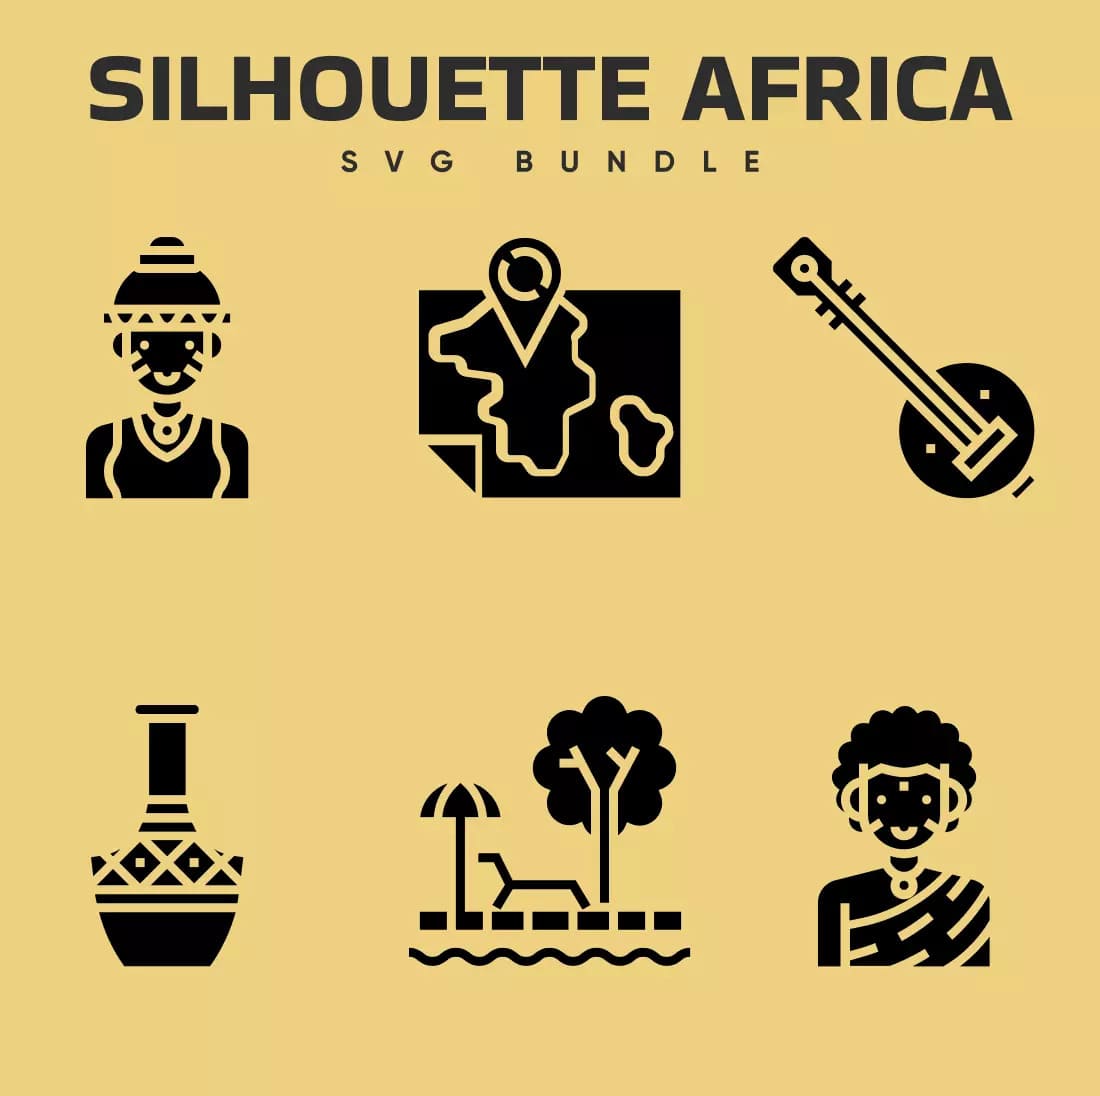 Silhouette Africa SVG Bundle Preview.